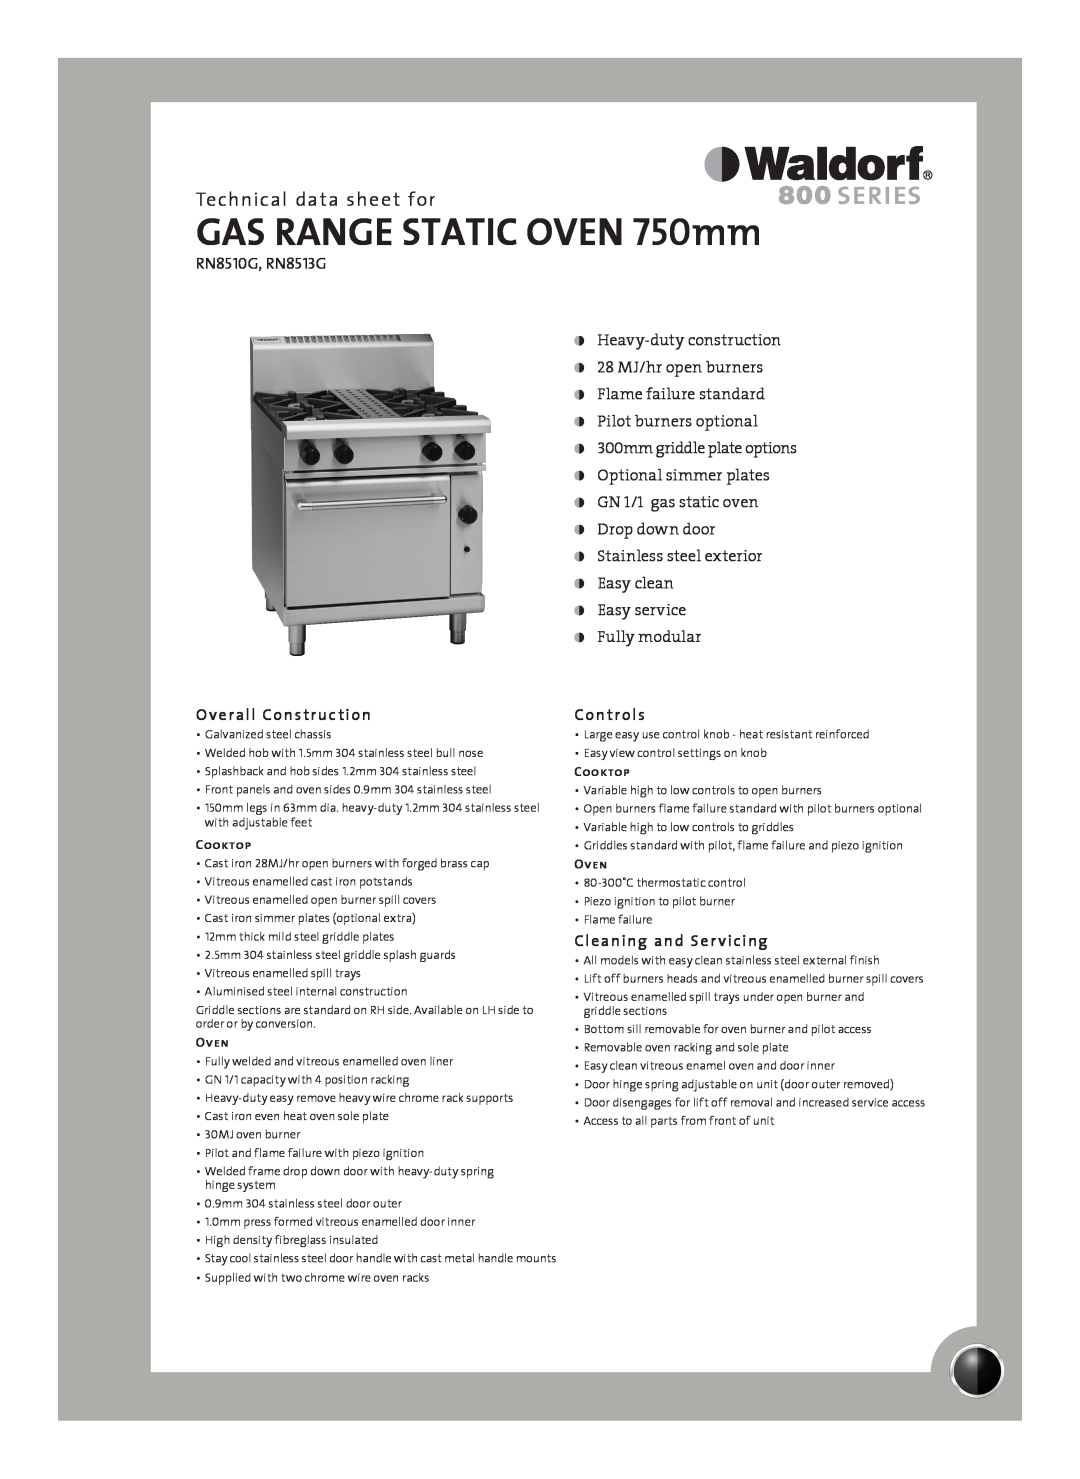 Moffat RN8513G manual Technical data sheet for, Overall Construction, Controls, Cleaning and Ser vicing, Cooktop, Oven 